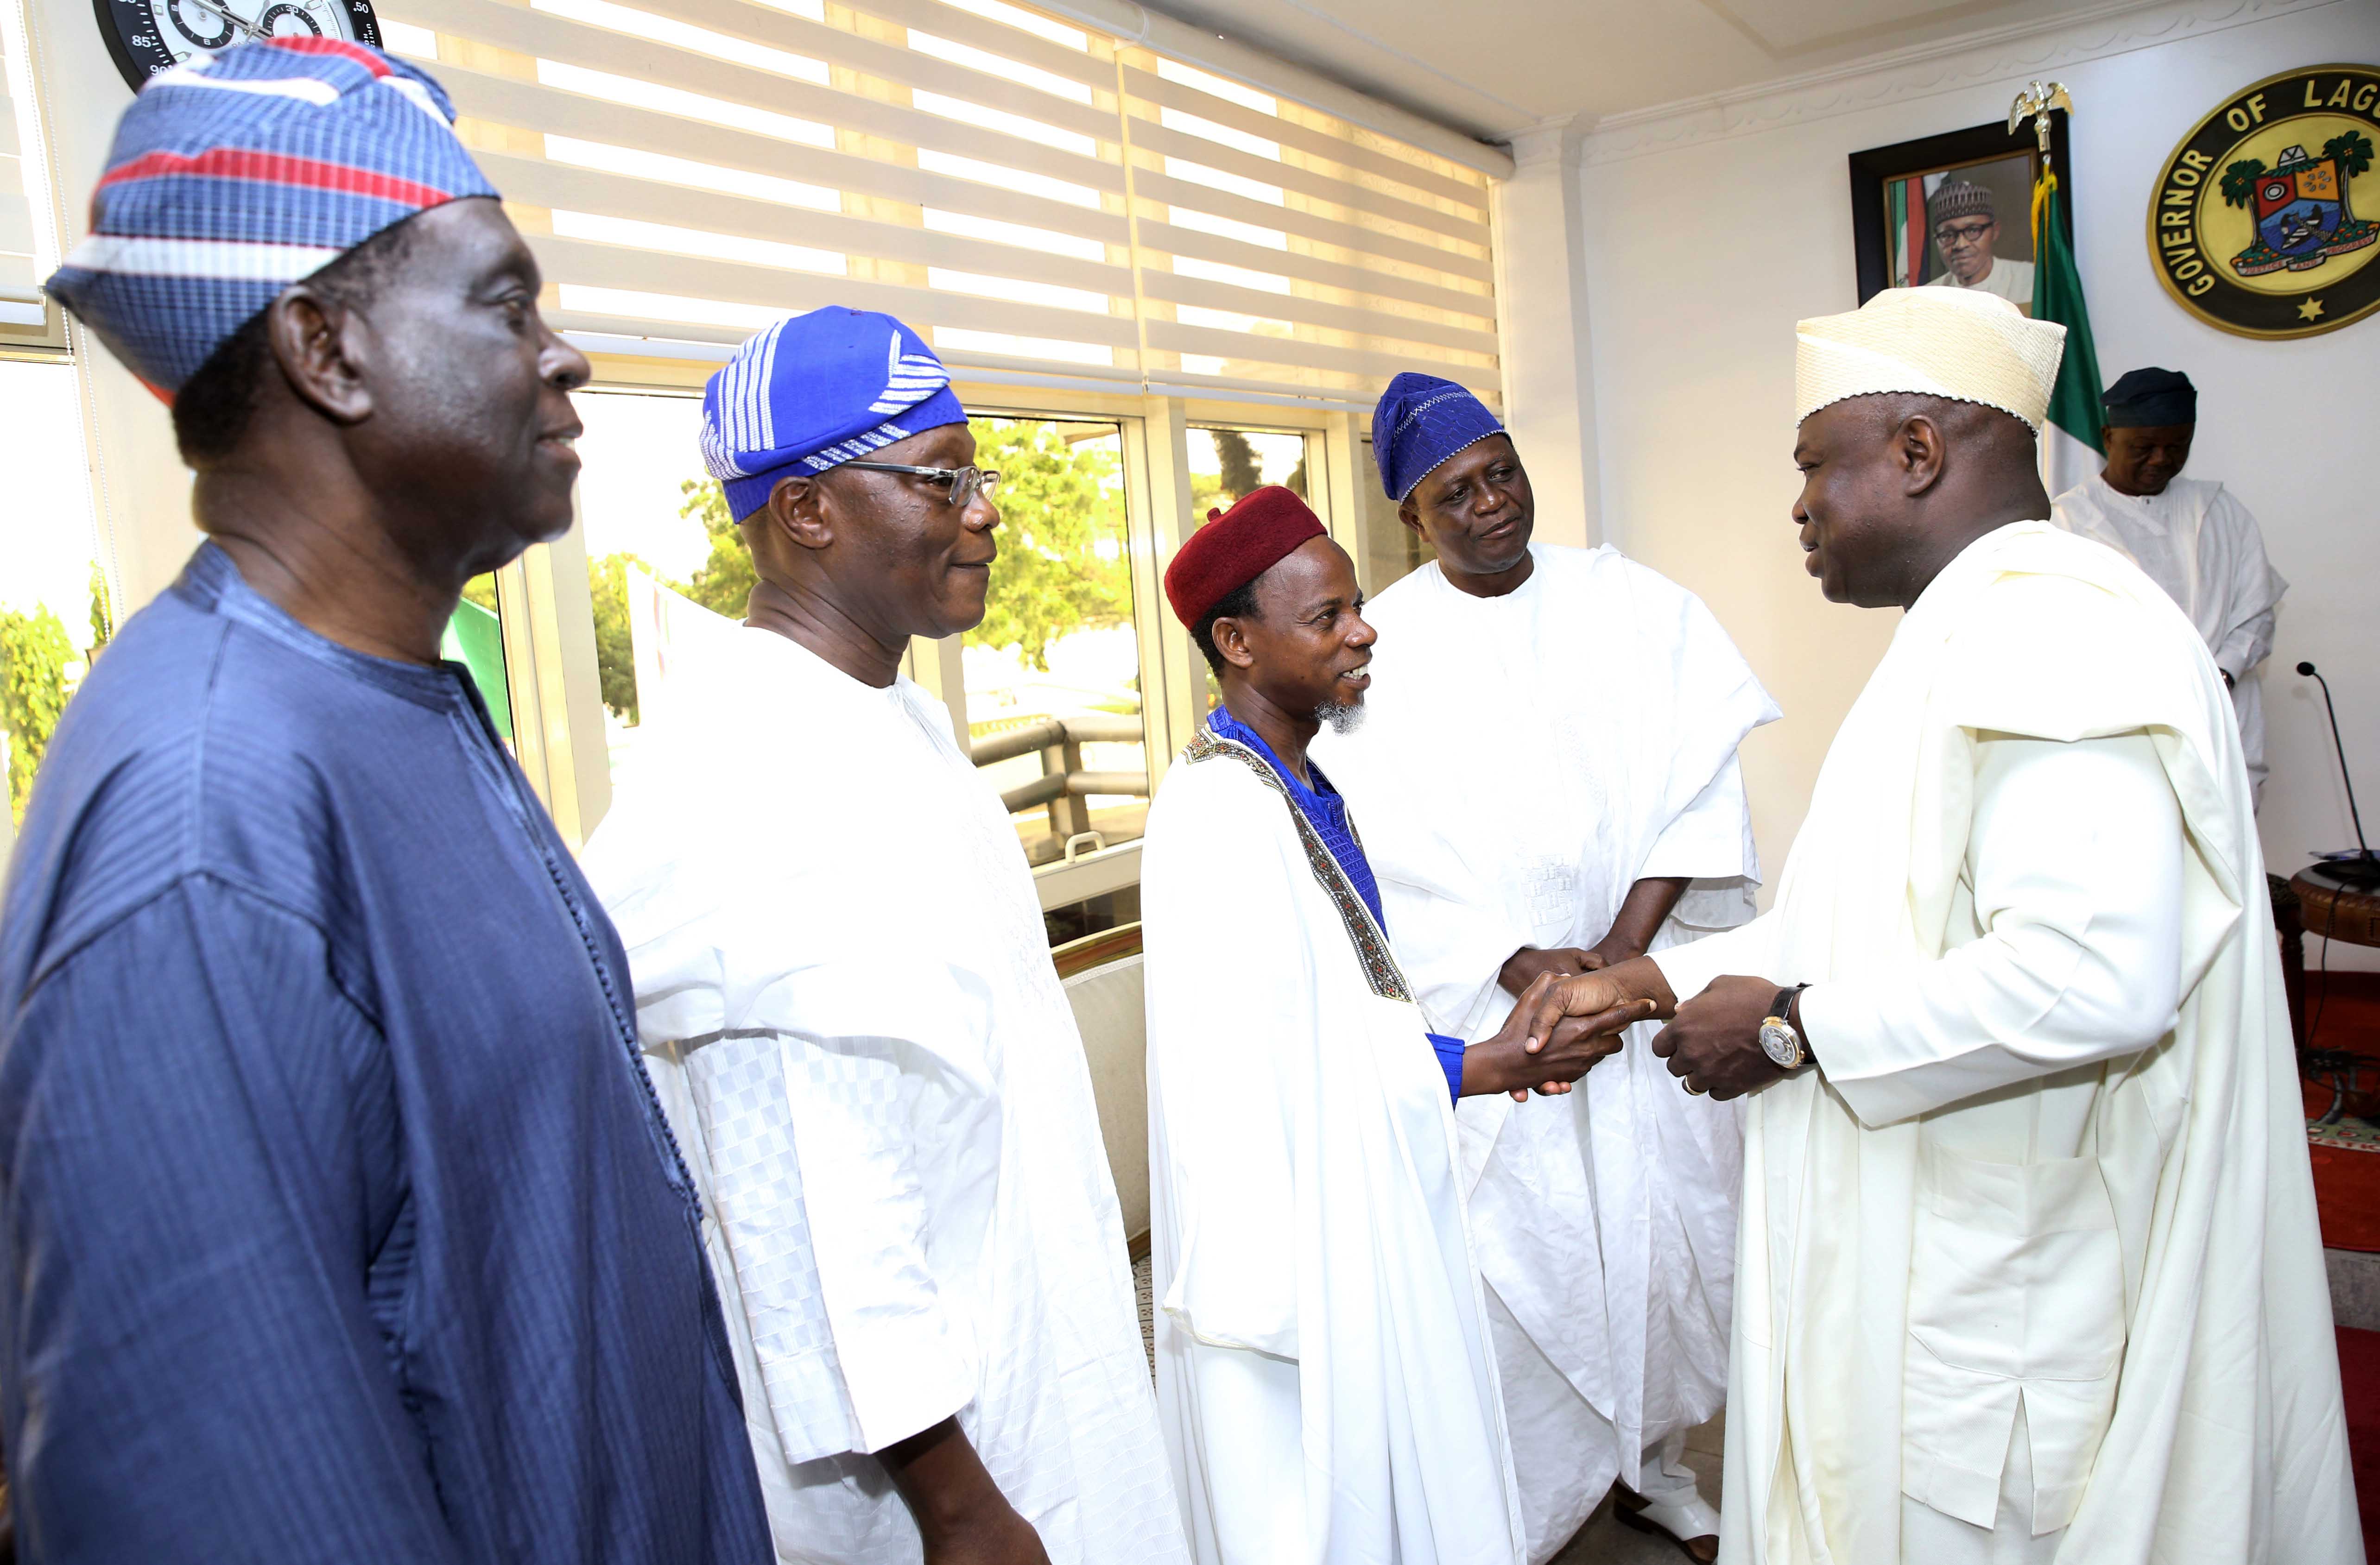 Lagos State Governor, Mr. Akinwunmi Ambode; Chairman, Board of Trustee, NASFAT, Dr. Wale Olasupo; Chief Missioner Worldwide, NASFAT, Imam Onike AbdulAzeez; Vice Chairman, Mosque Committee, NASFAT, Alhaji Remi Bello and Chairman, National Council of Elders, NASFAT, Alhaji Olalekan Saliu during a courtesy visit by Leaders of NASFAT Islamic Group at the Lagos House, Ikeja, on Thursday, November 30, 2017.